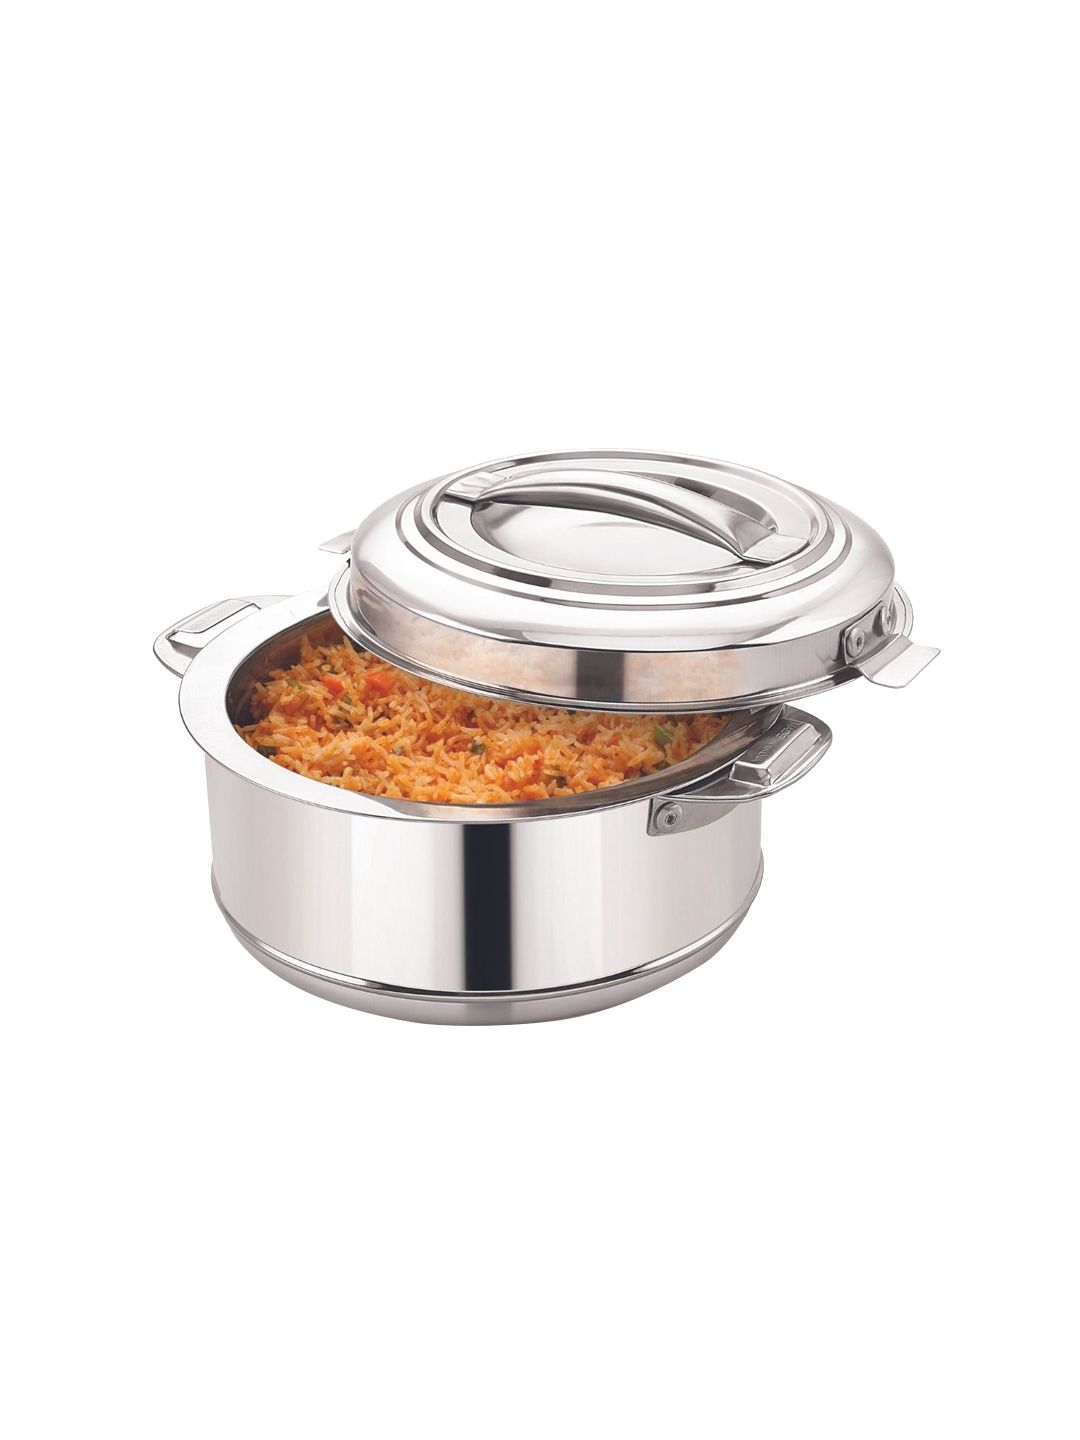 MAGNUS Unisex Stainless Steel Casserole Cookware Price in India